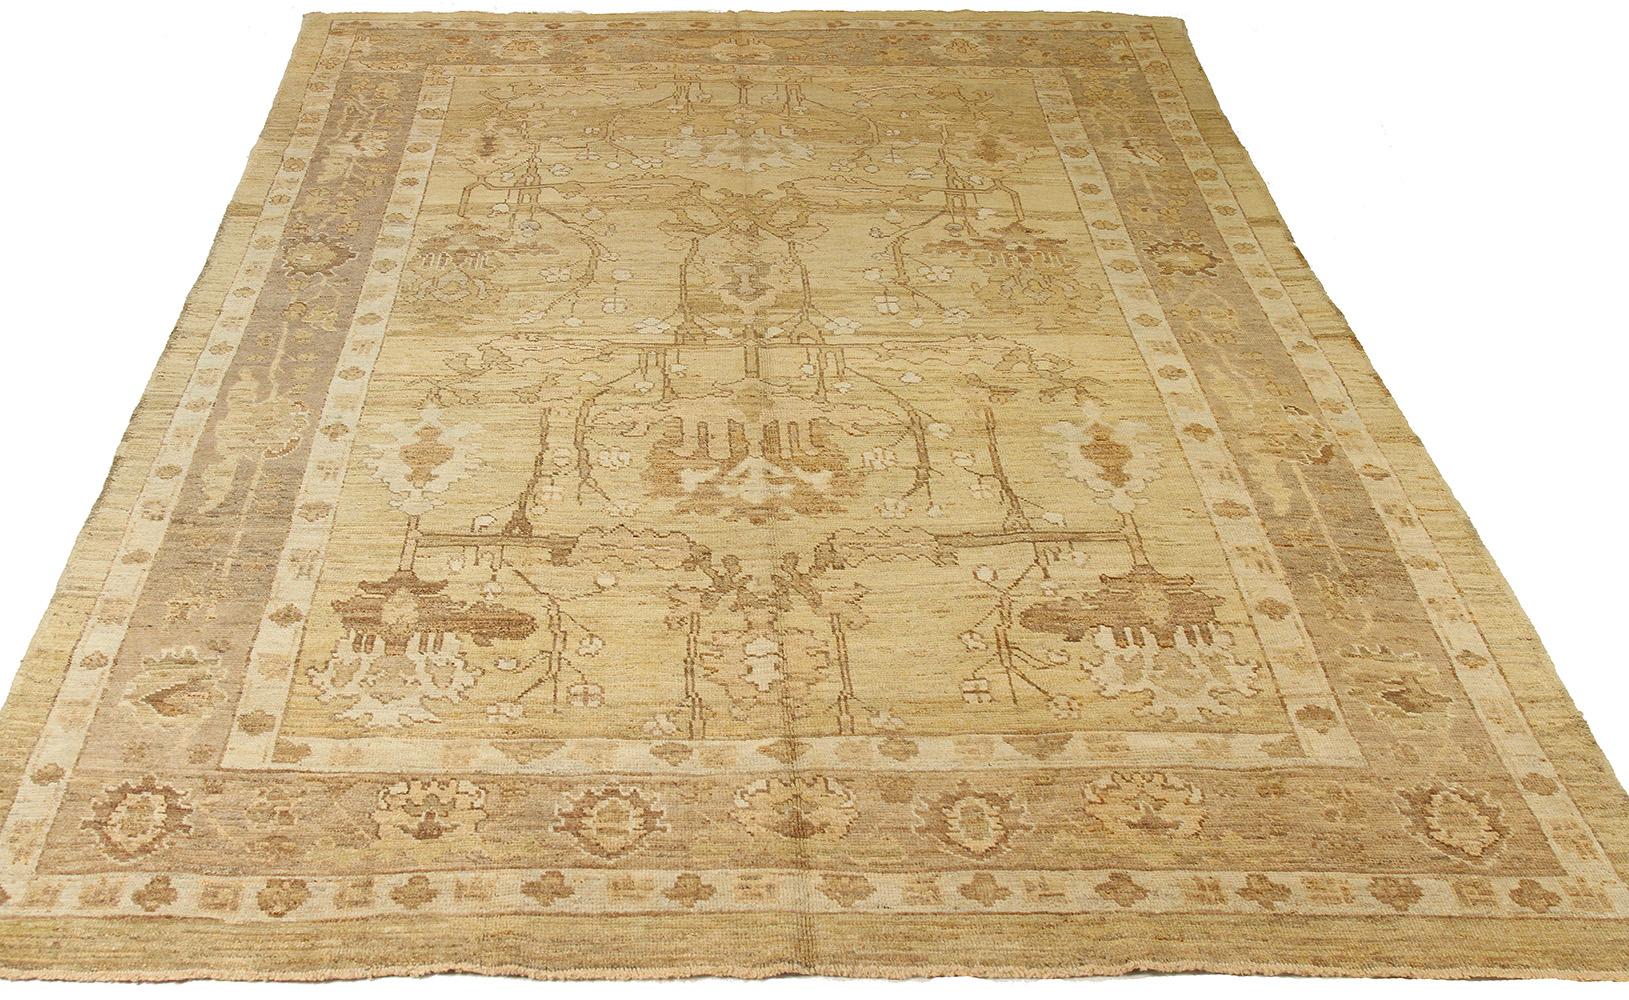 Contemporary handmade Turkish area rug from high-quality sheep’s wool and colored with eco-friendly vegetable dyes that are proven safe for humans and pets alike. It’s a Donegal design showcasing an ivory field with beautiful white and brown floral